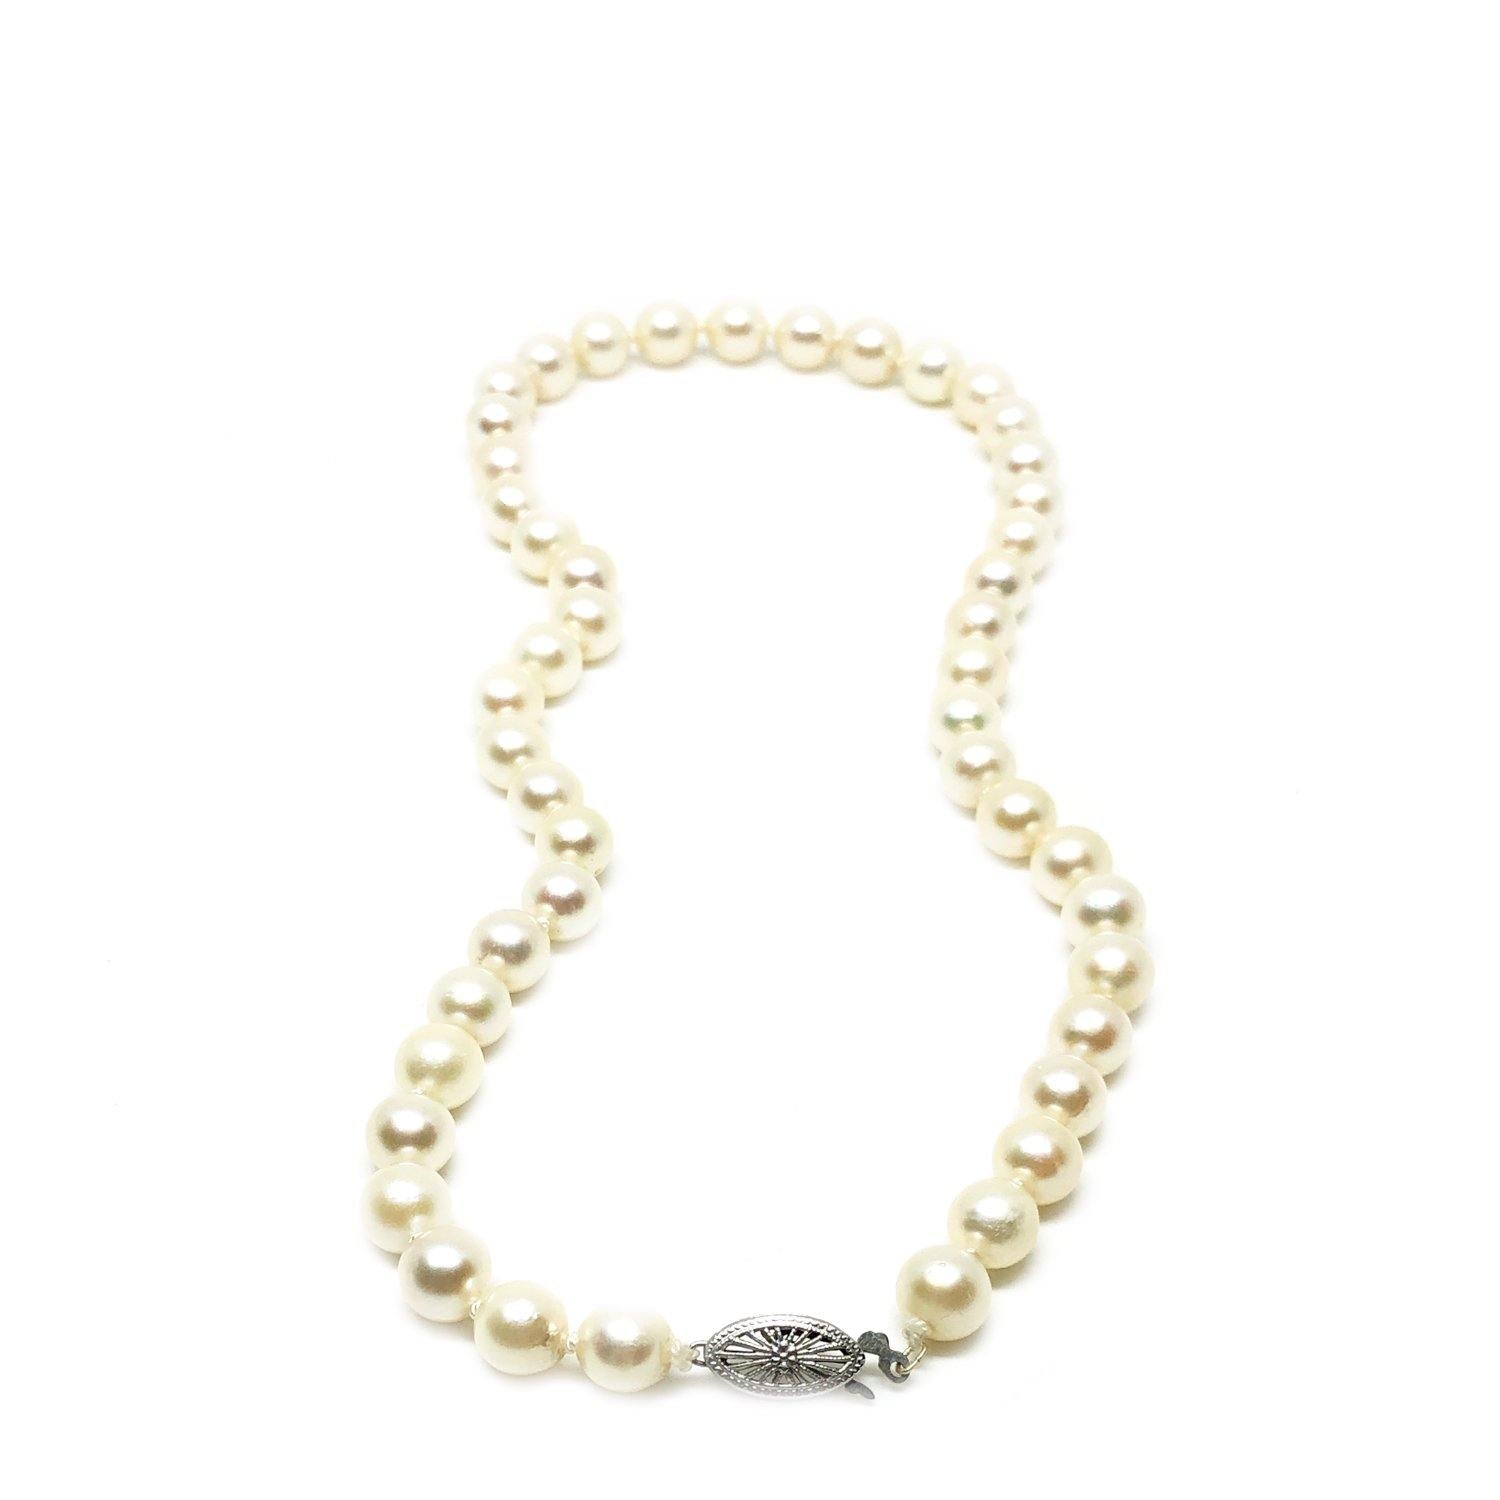 Filigree White Japanese Saltwater Cultured Akoya Pearl Necklace - 14K White Gold 16 Inch